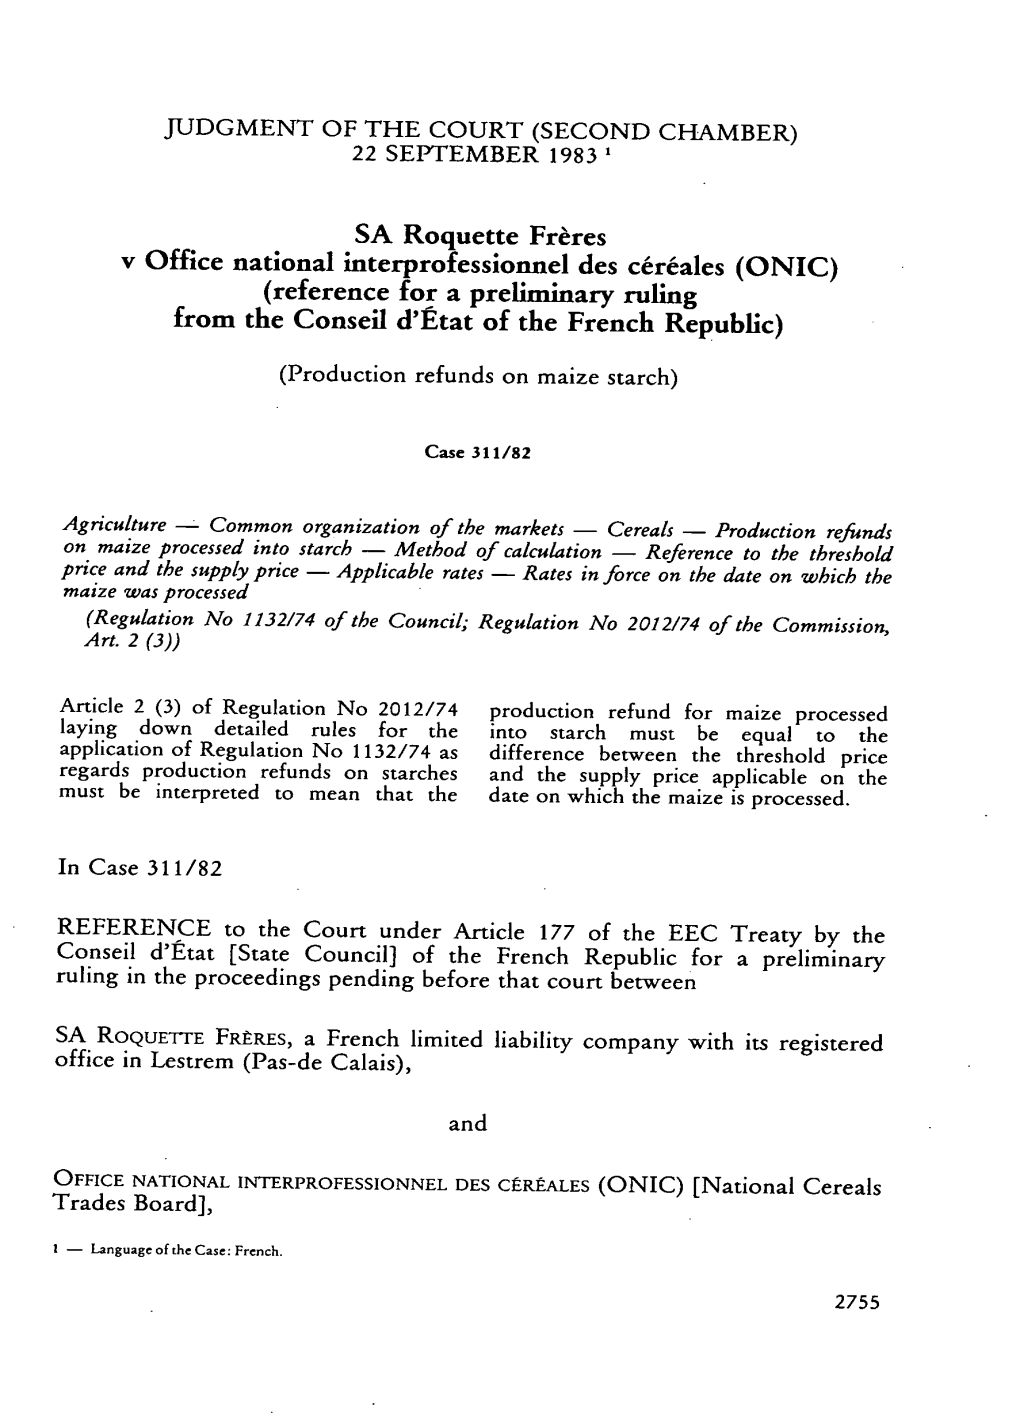 SA Roquette Frères V Office National Interprofessionnel Des Céréales (ONIC) (Reference for a Preliminary Ruling from the Conseil D'état of the French Republic)